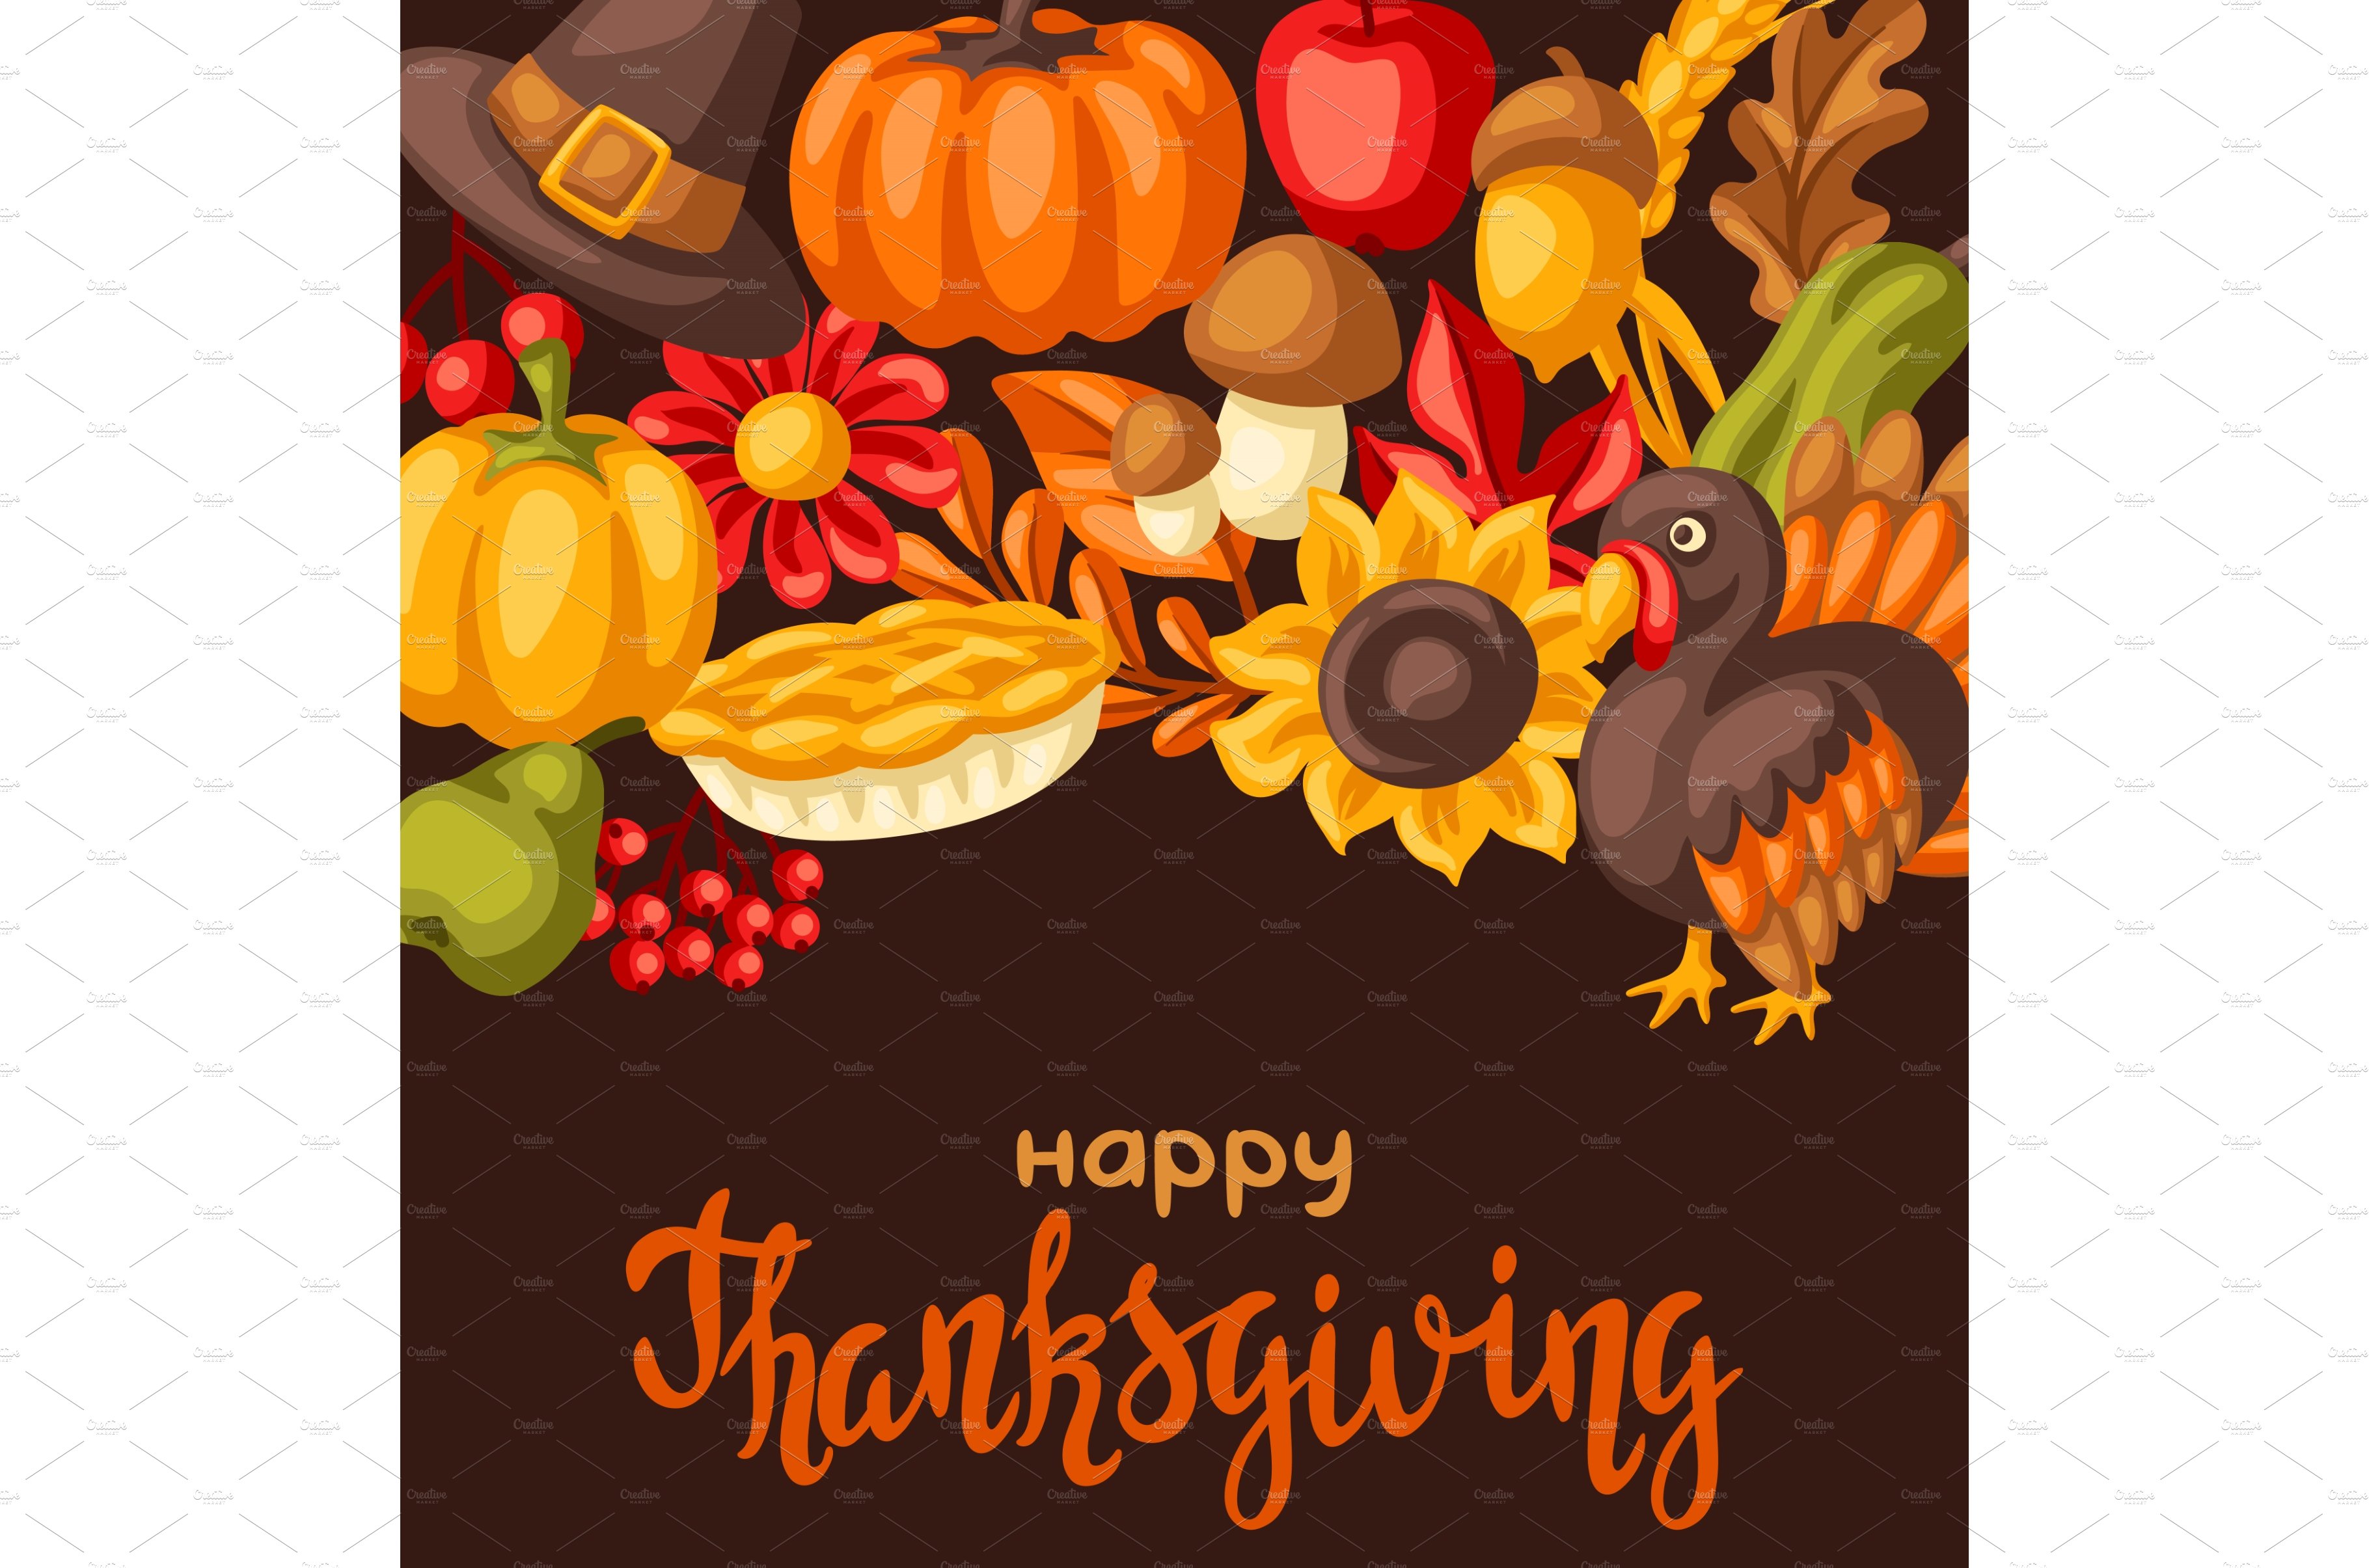 Happy Thanksgiving Day background cover image.